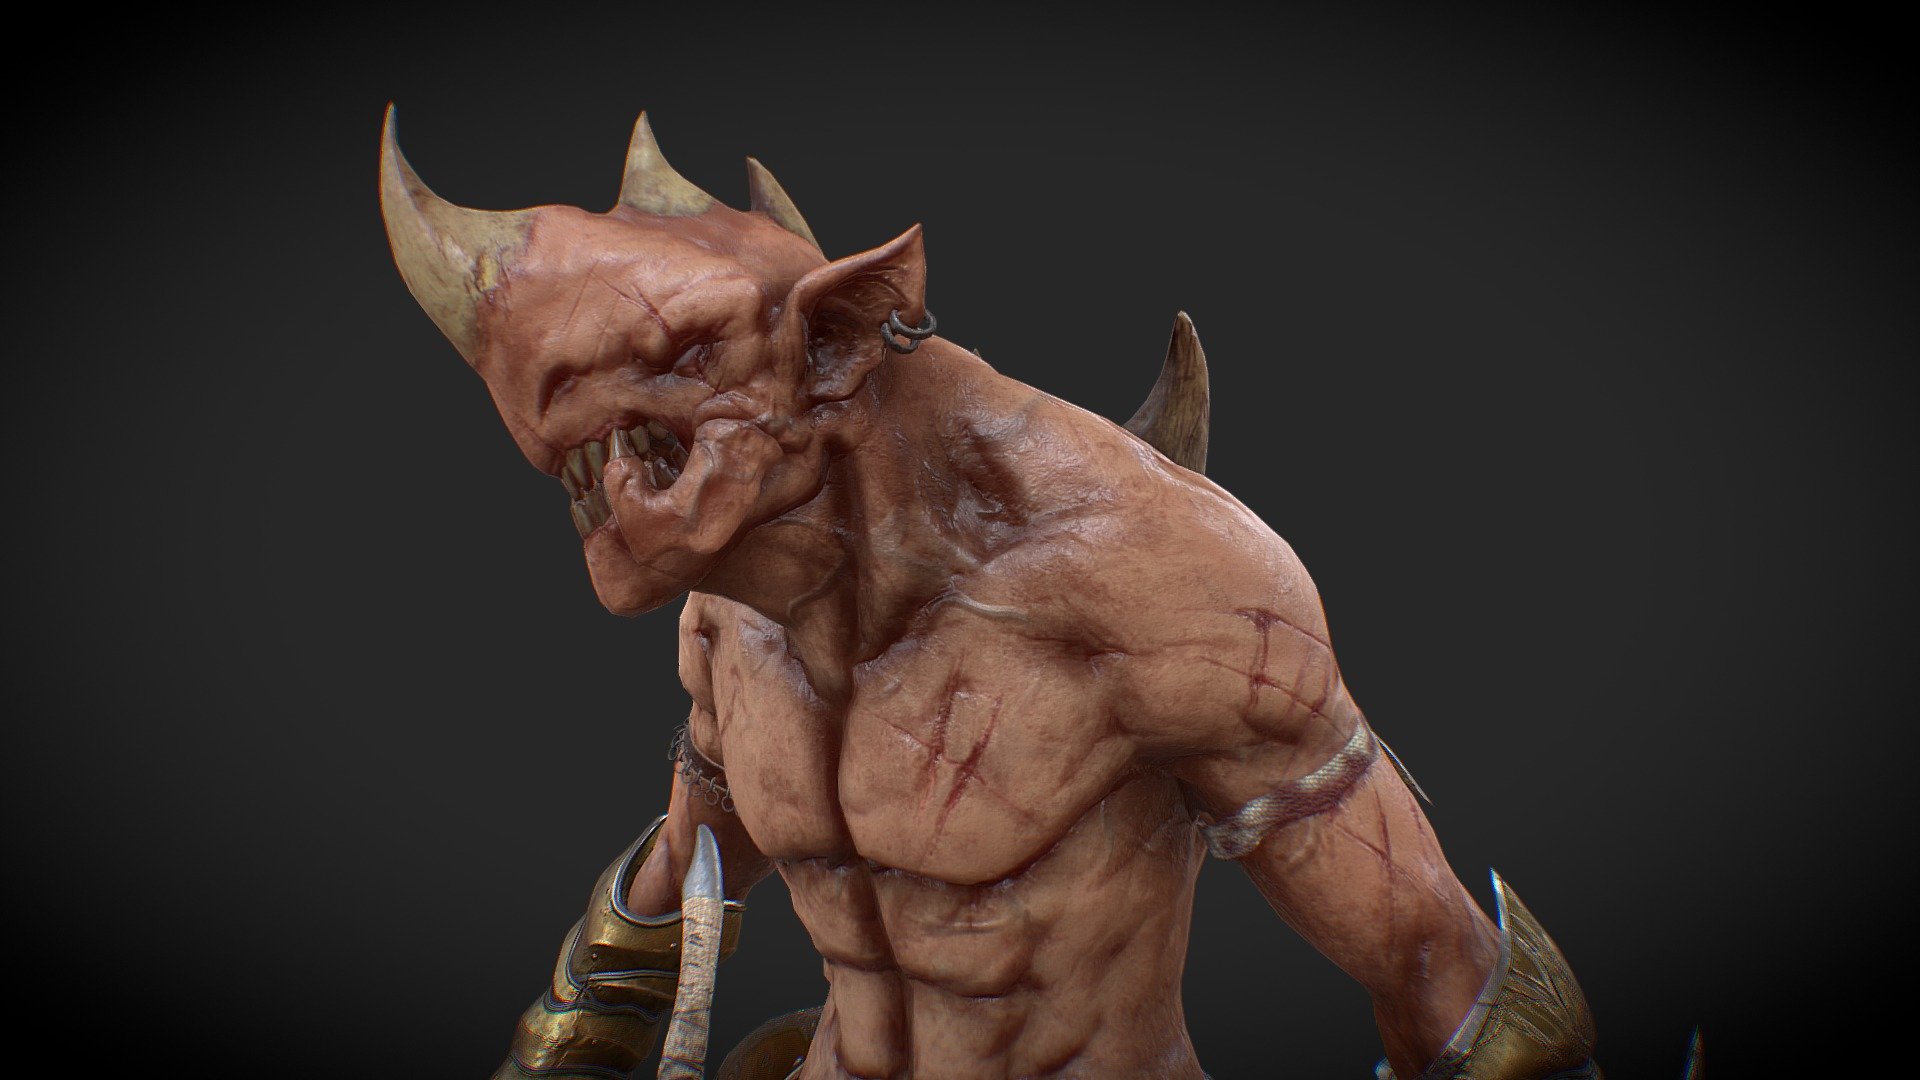 Character I did in my space time. Design based on concept by Kai E Soh.
zbrush, Maya, Substance painter 3d model